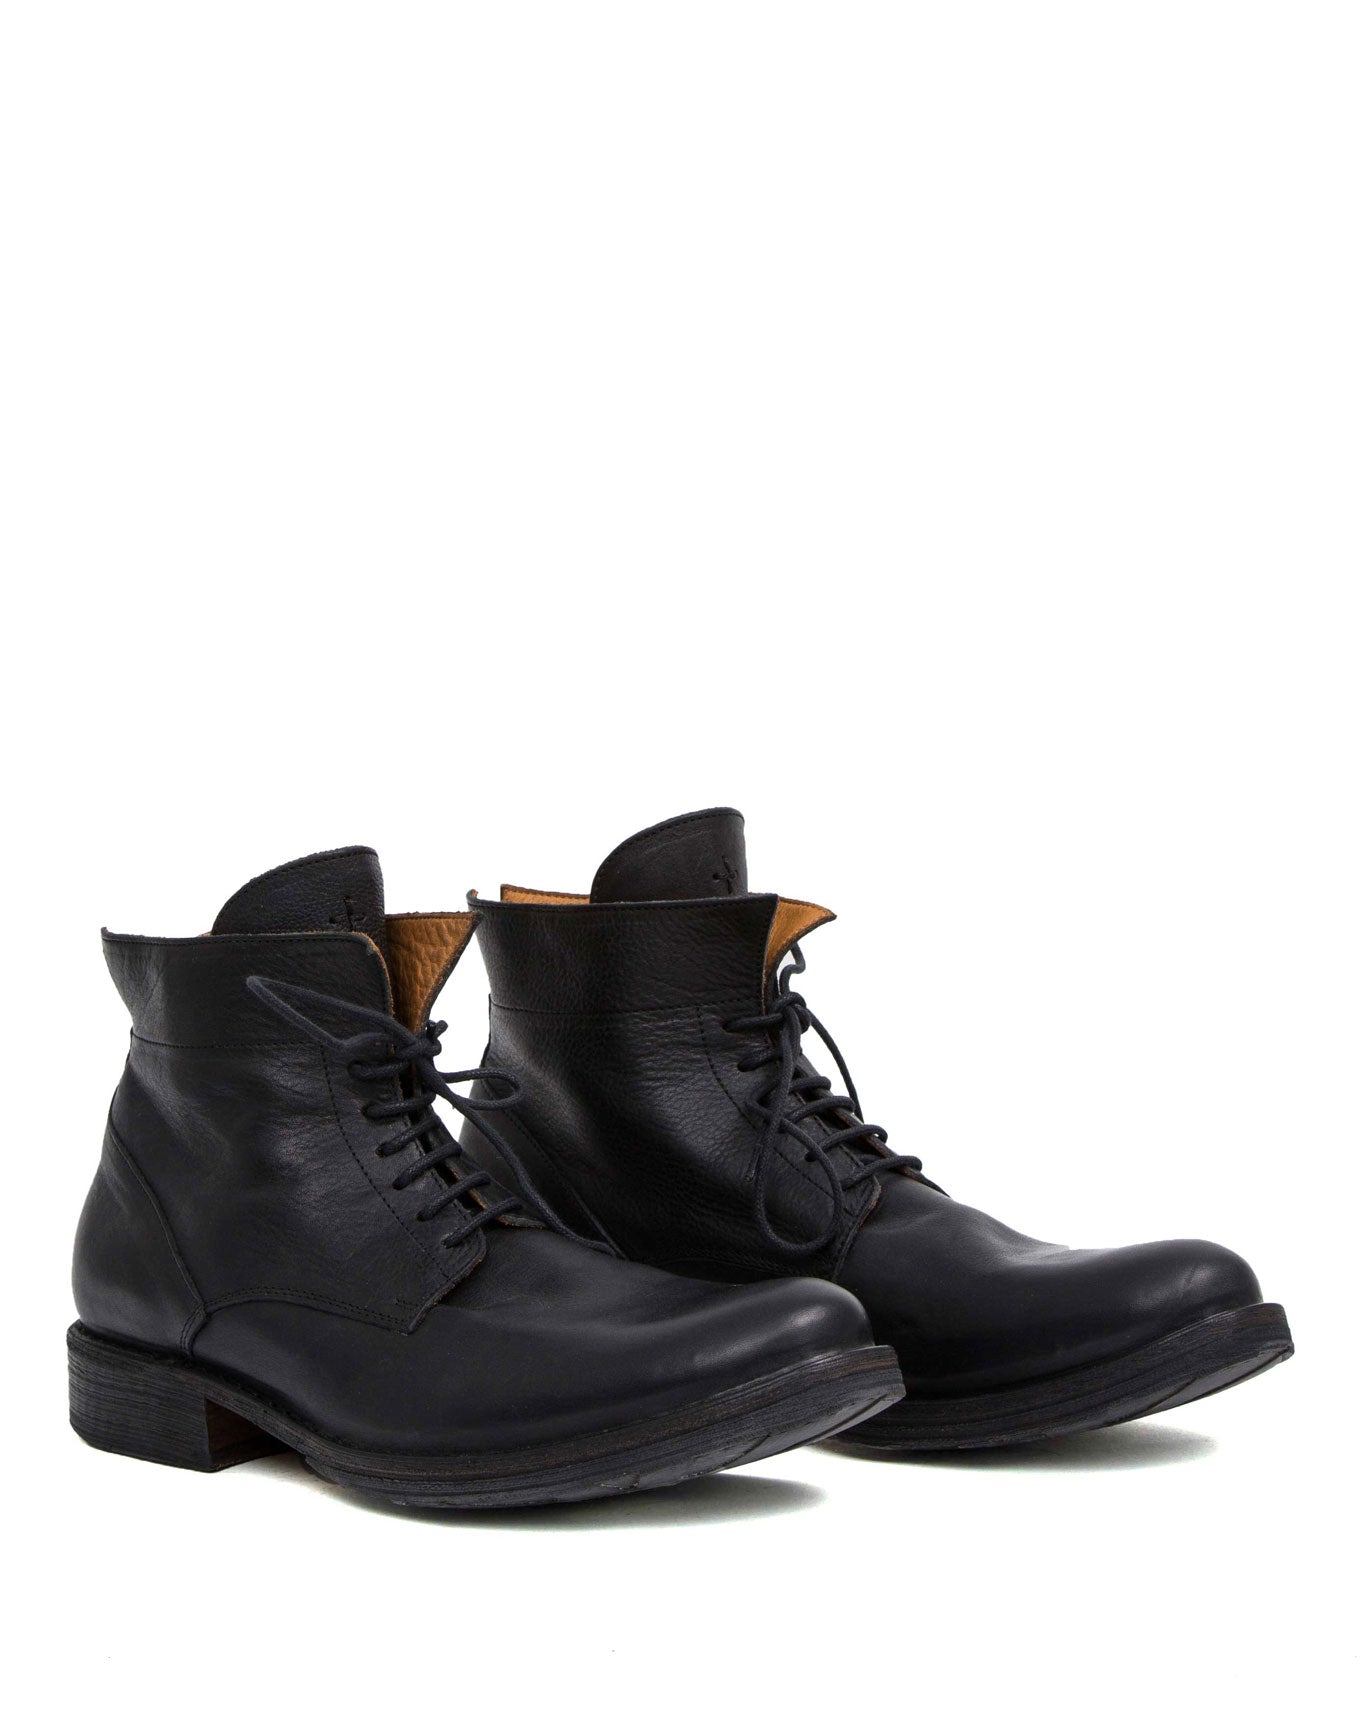 Fiorentini + Baker, ETERNITY 745, Iconic heritage style inspired by a 1920’s work boot. Unisex lace up ankle boot. Handcrafted by skilled artisans. Made in Italy. Made to last.